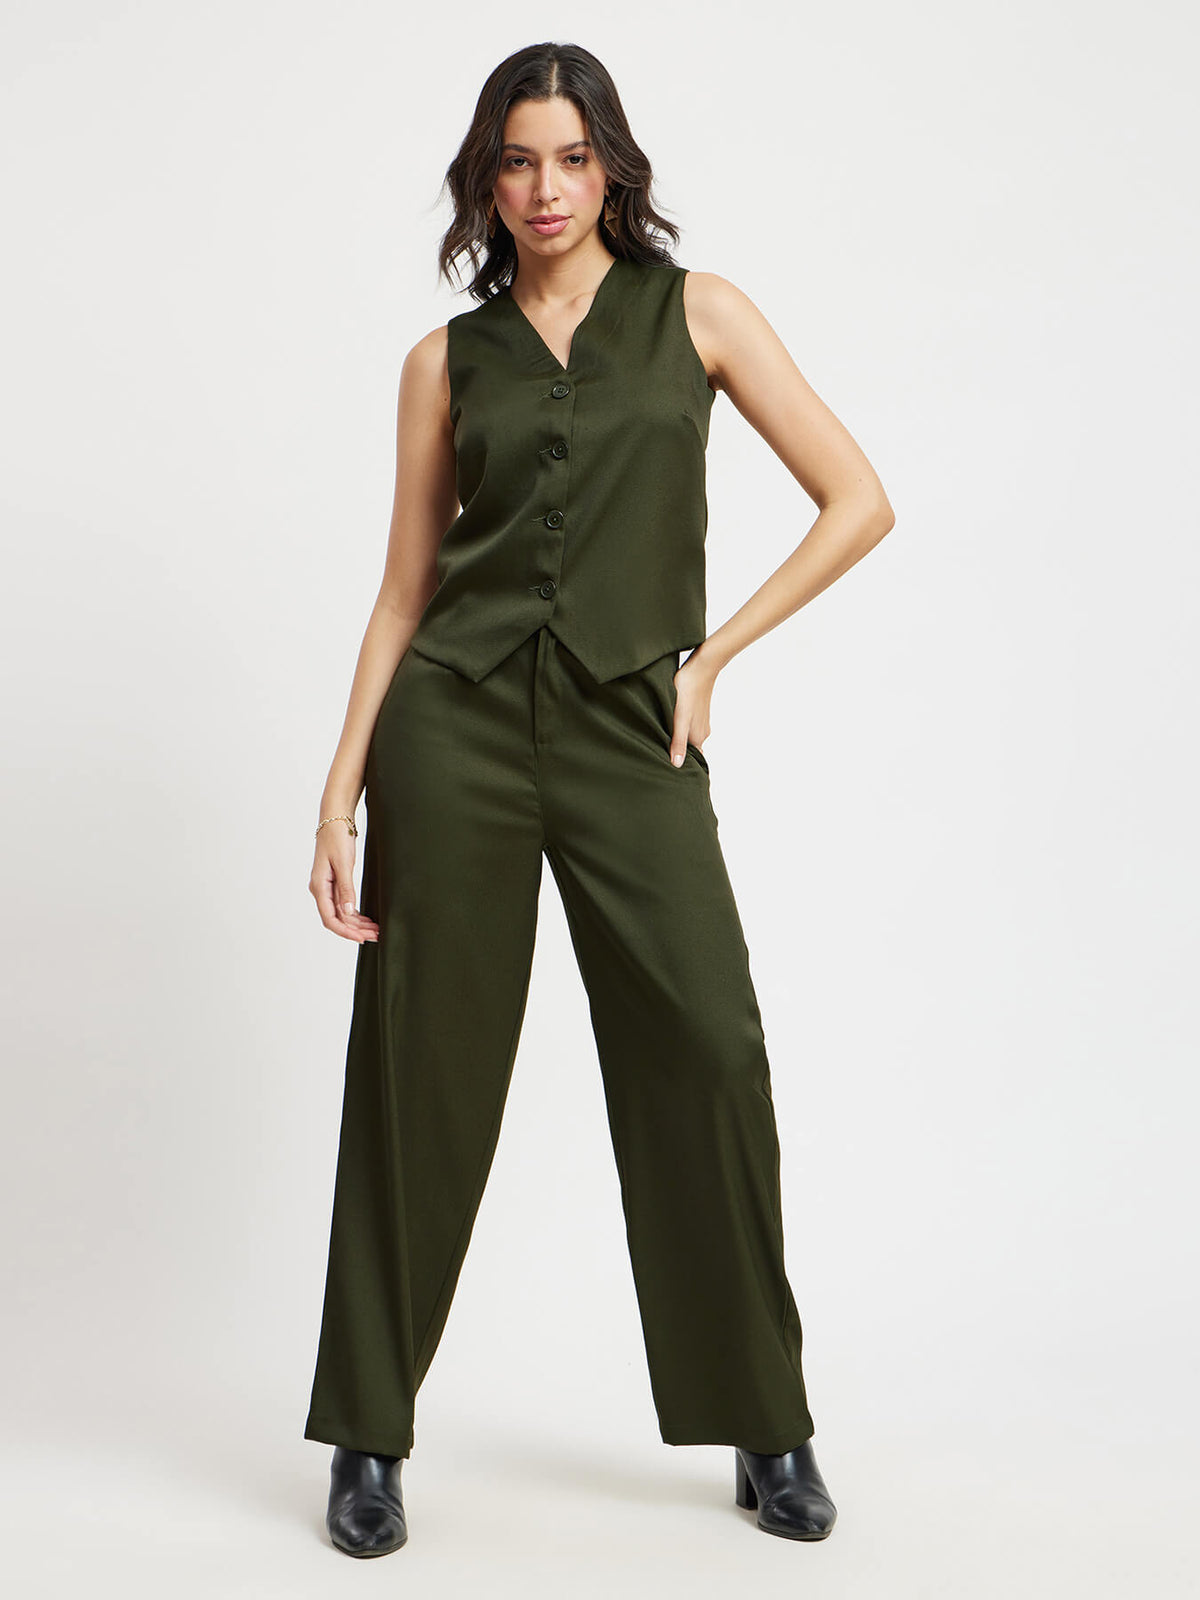 Button Down Vest And Trousers Co-ord Set - Olive